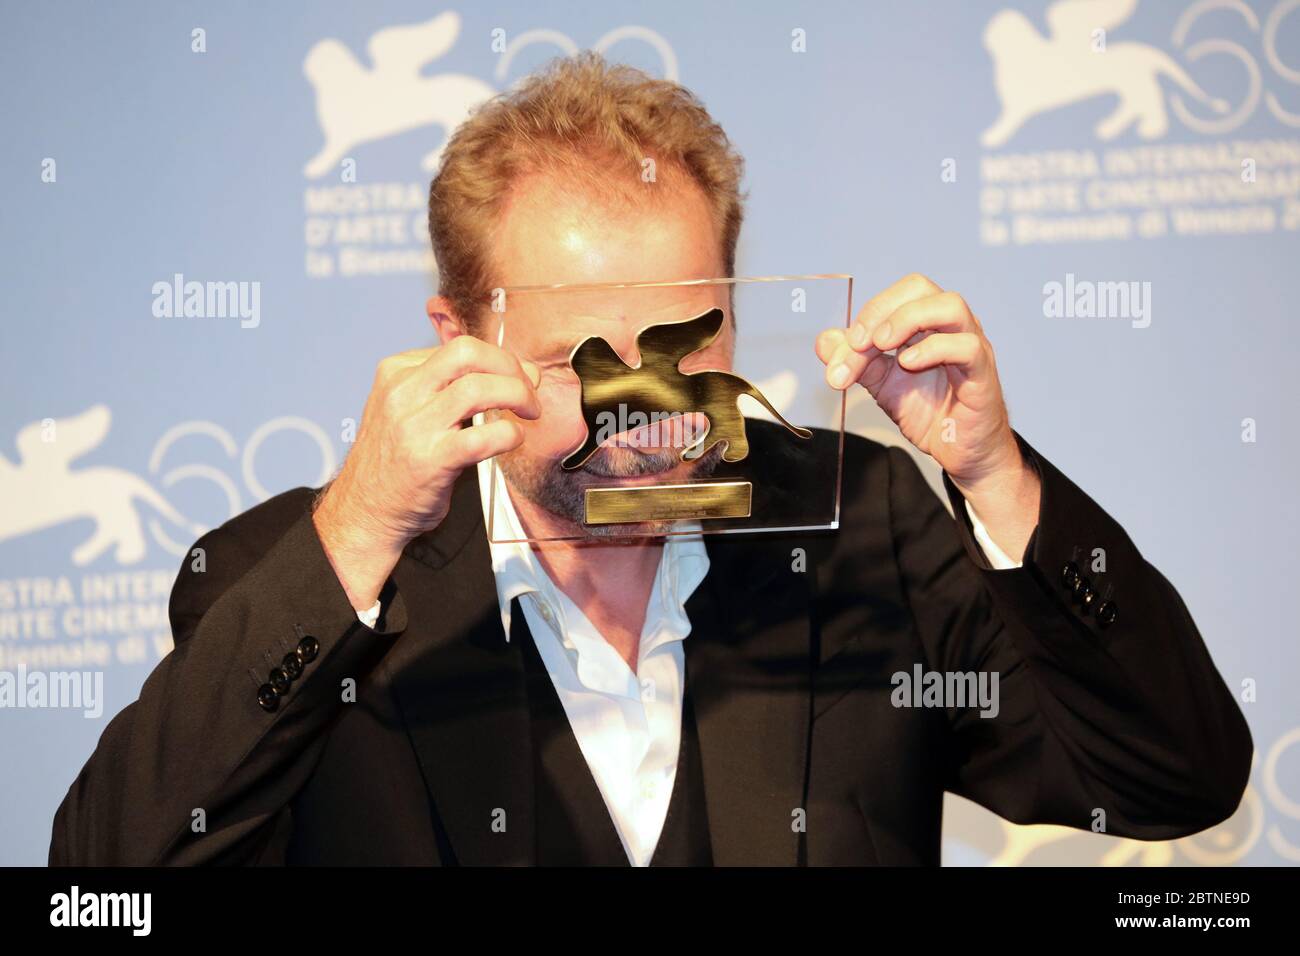 VENICE, ITALY - SEPTEMBER 08: Ulrich Seidl holds the Special Jury Prize for 'Paradies' at the Award Winners Photocall Stock Photo